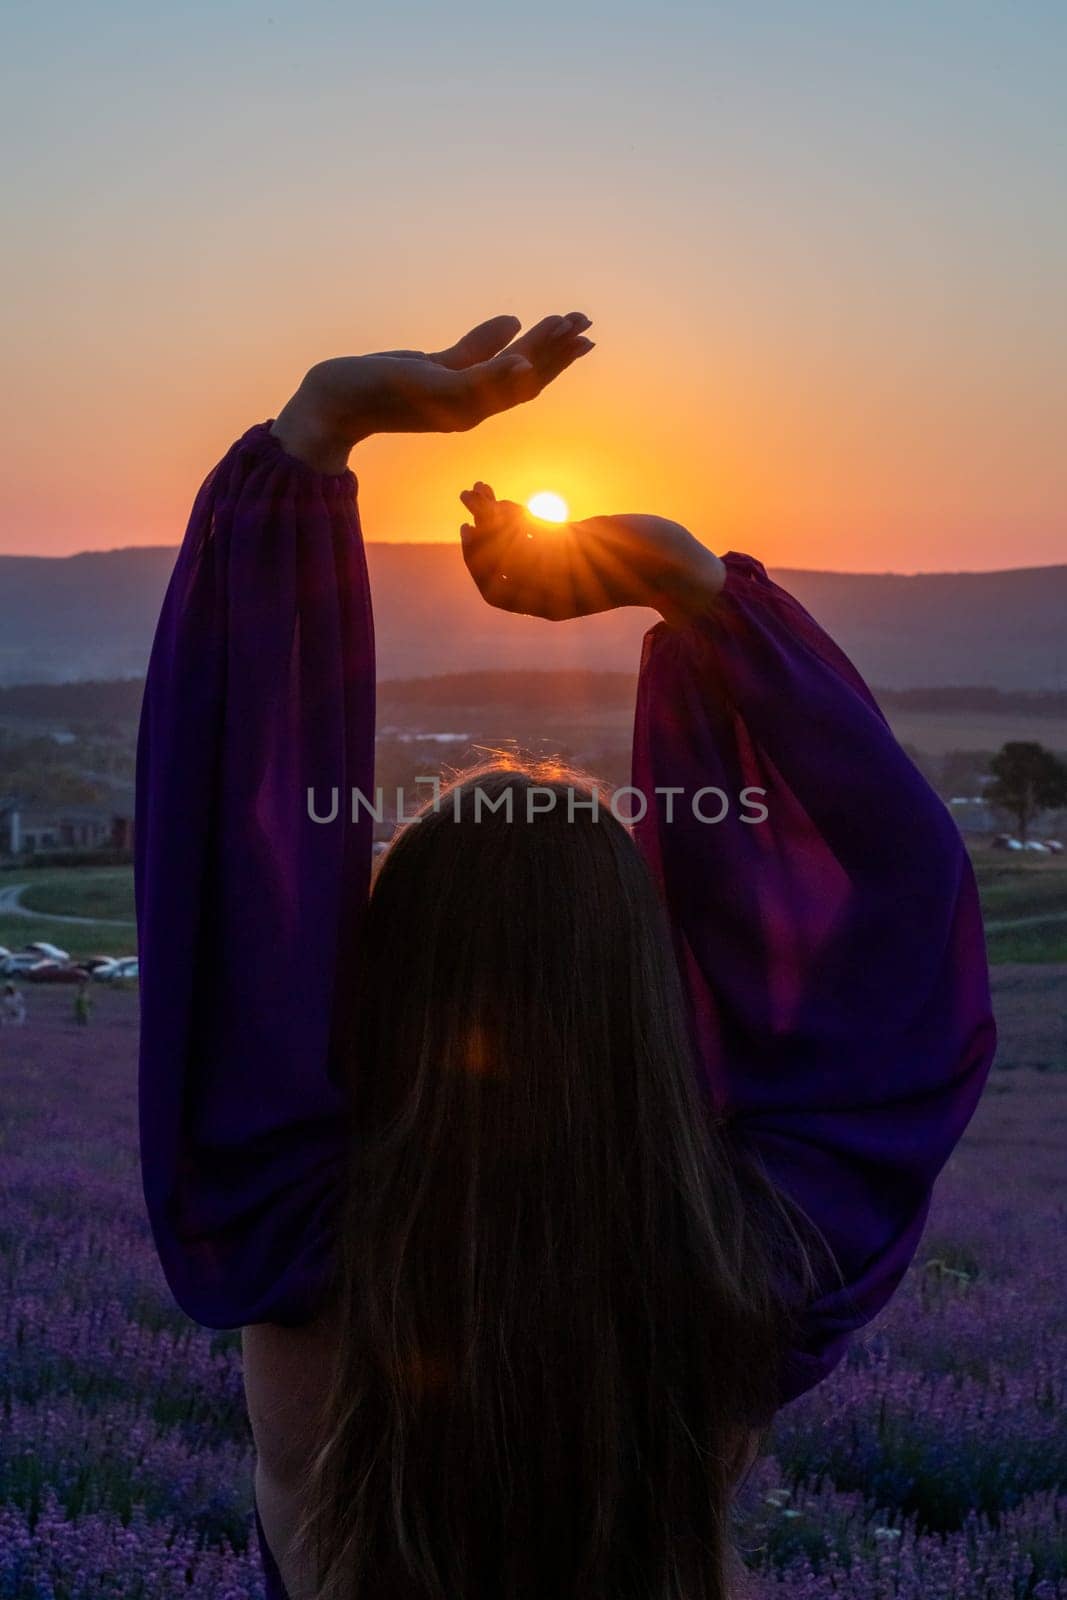 Woman raises arms in lavander field at sunset enjoys sunset in purple flower field. Serene floral setting. Setting sun. Conveying peaceful ambiance in flower field at sunset. by Matiunina